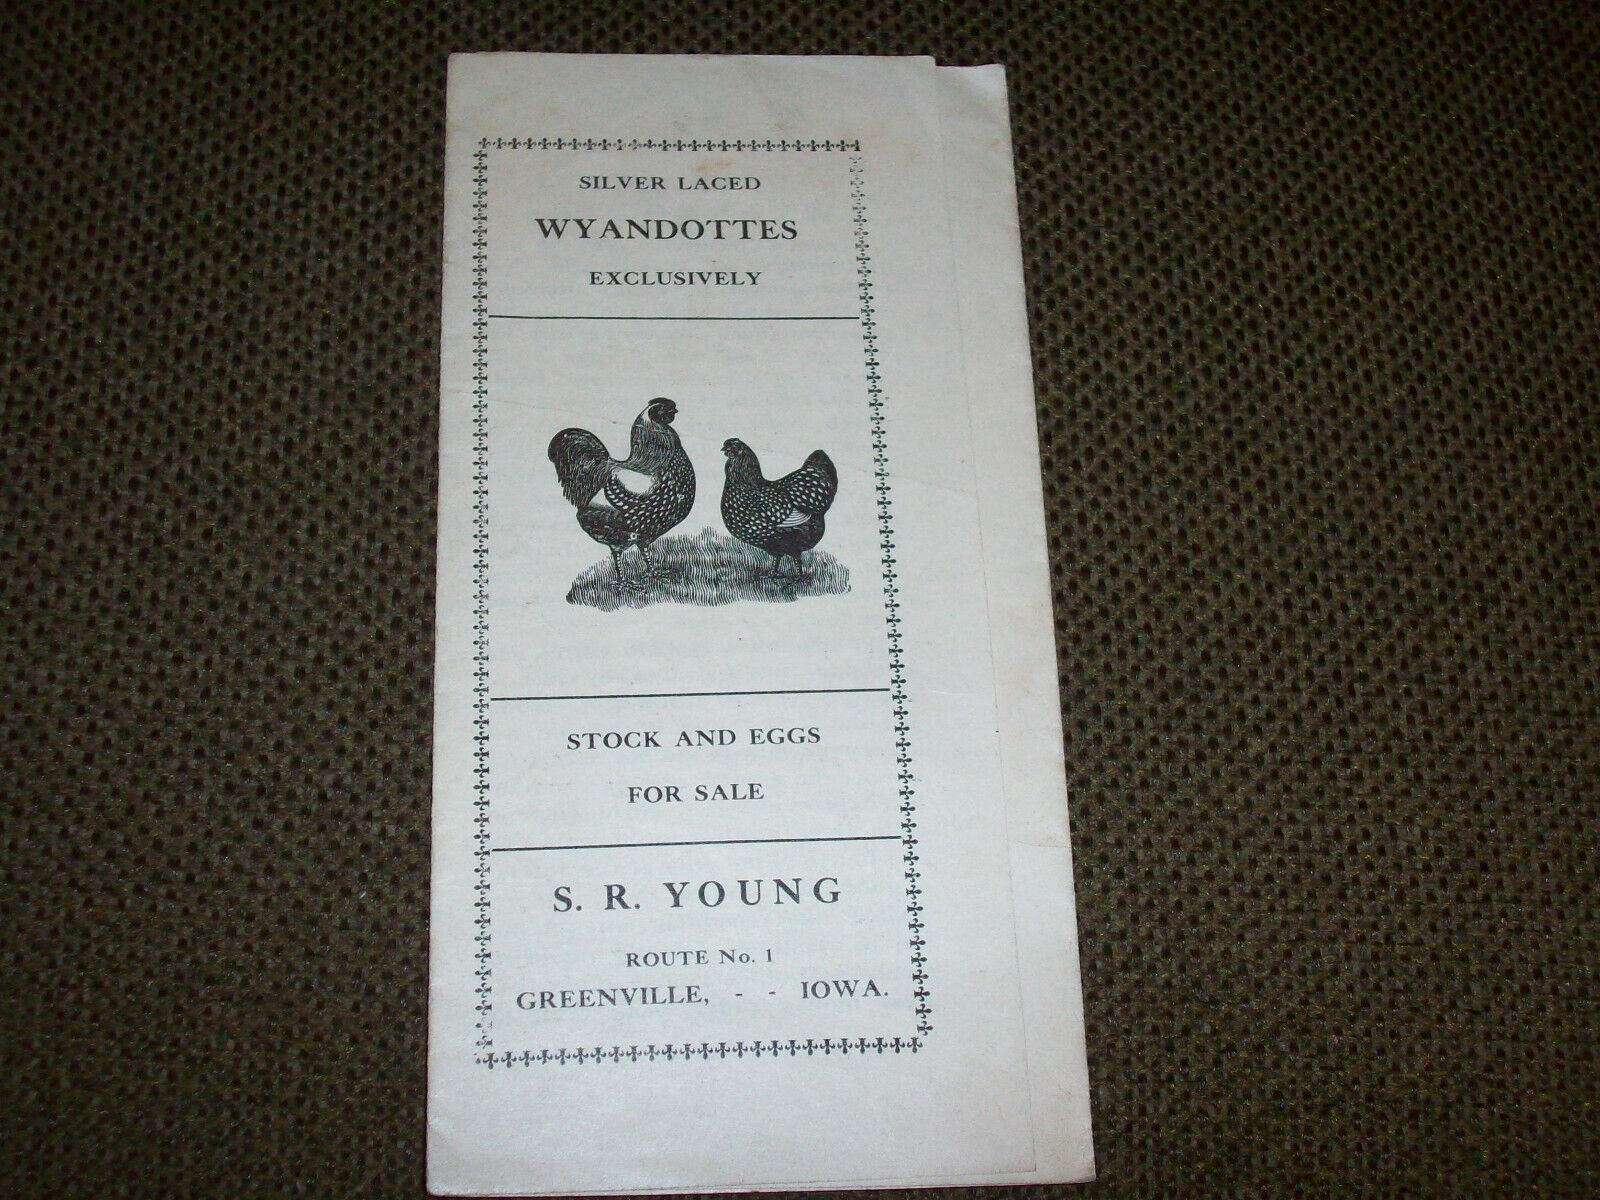 1908 Silver Laced Wyandotte Chicken Advertising Greenville Iowa S.R. Young